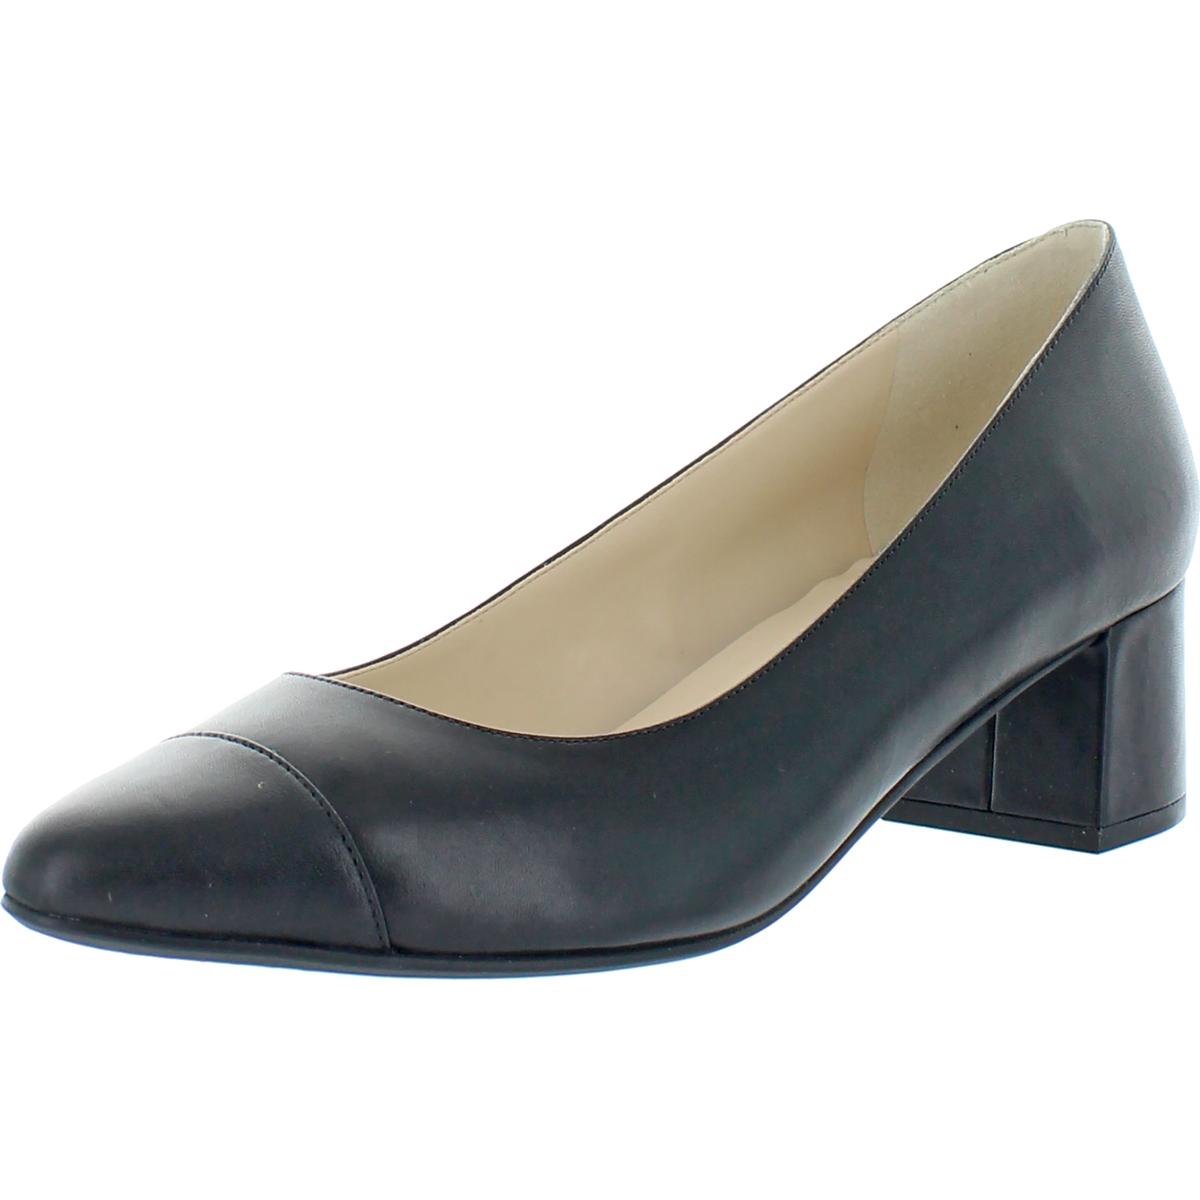 Cole Haan Womens The Go-To Black Leather Pumps Shoes 8.5 Medium (B,M ...